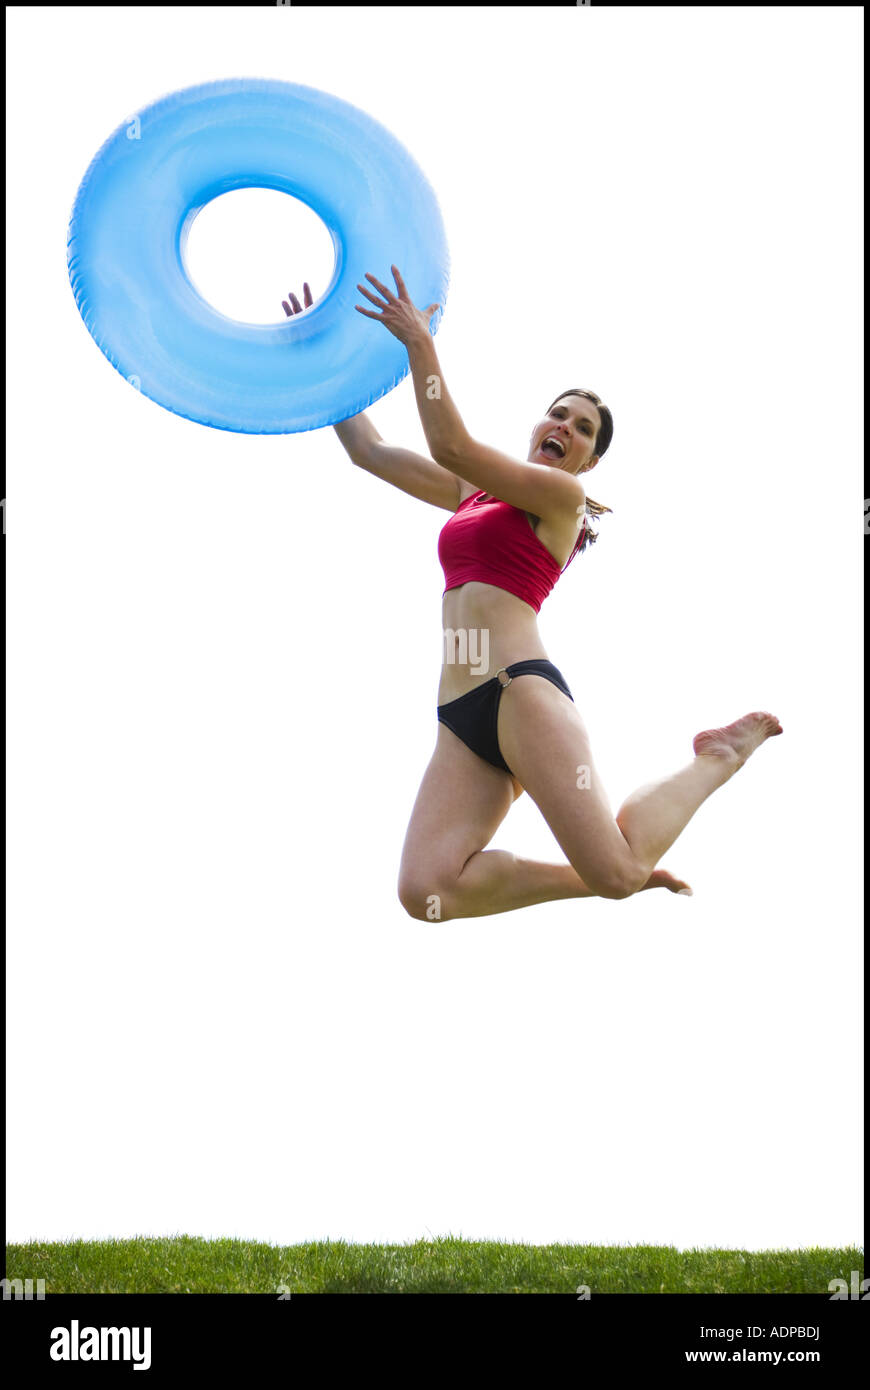 Woman in bikini jumping and smiling with swimming ring Stock Photo